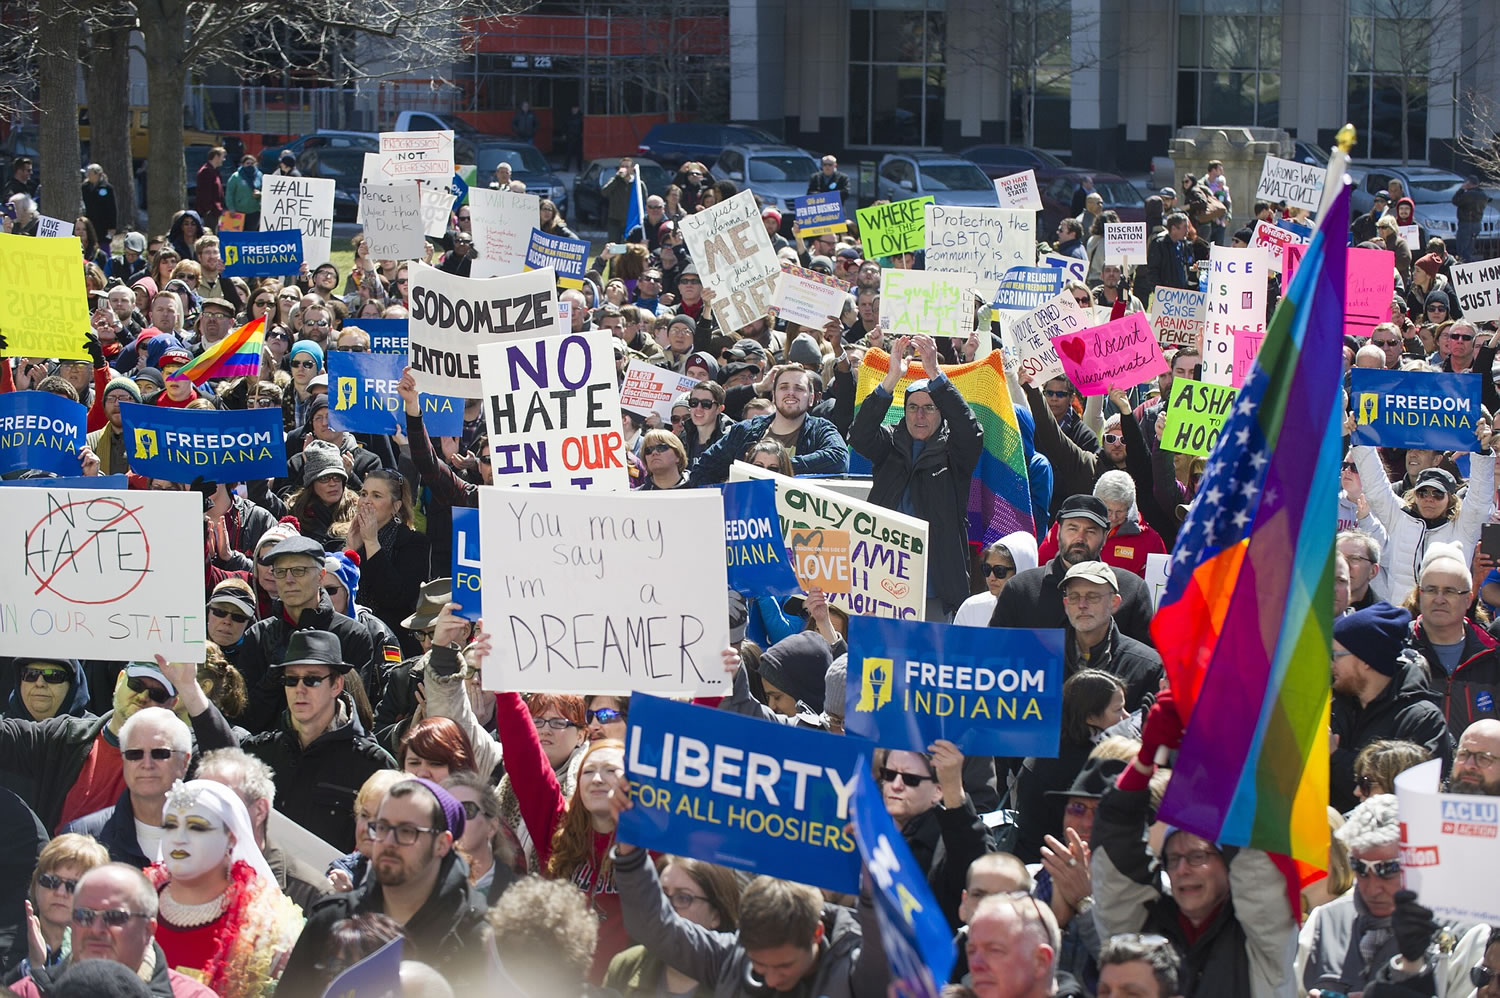 Thousands of opponents of Indiana Senate Bill 101, the Religious Freedom Restoration Act, gathered on the lawn of the Indiana State House to rally against that legislation Saturday. Republican Gov.